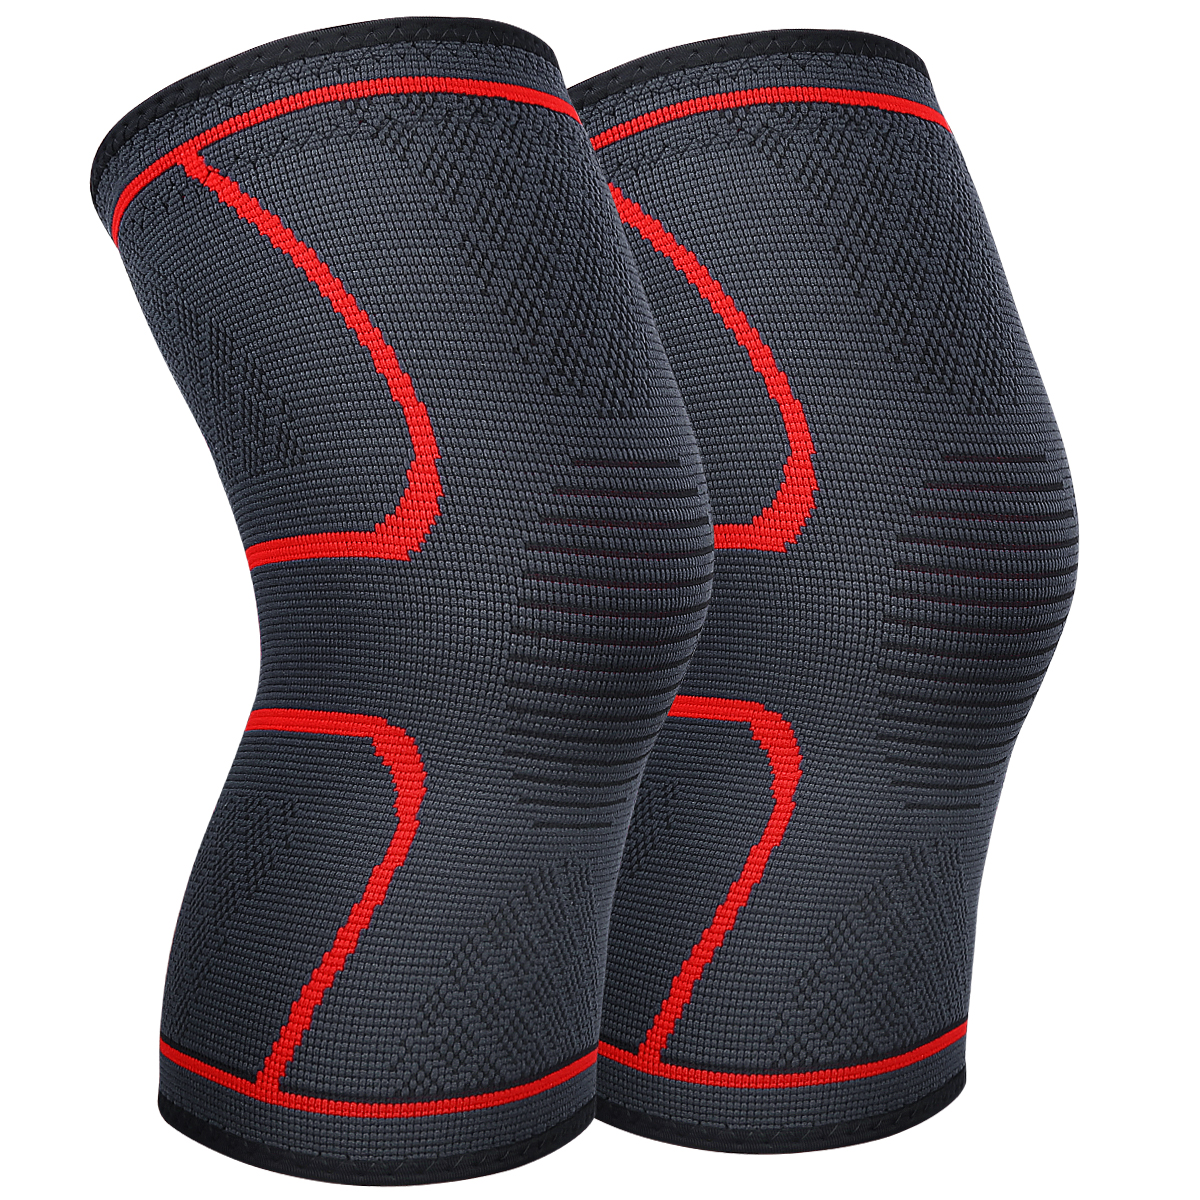 Knee Brace Support Pair for Men Women, AVIDDA Compression Knee Sleeve for Joint Pain Relief, Arthritis, Meniscus Tear, Injury Recovery, Running, Squats, Weight Lifting, Football Red XL